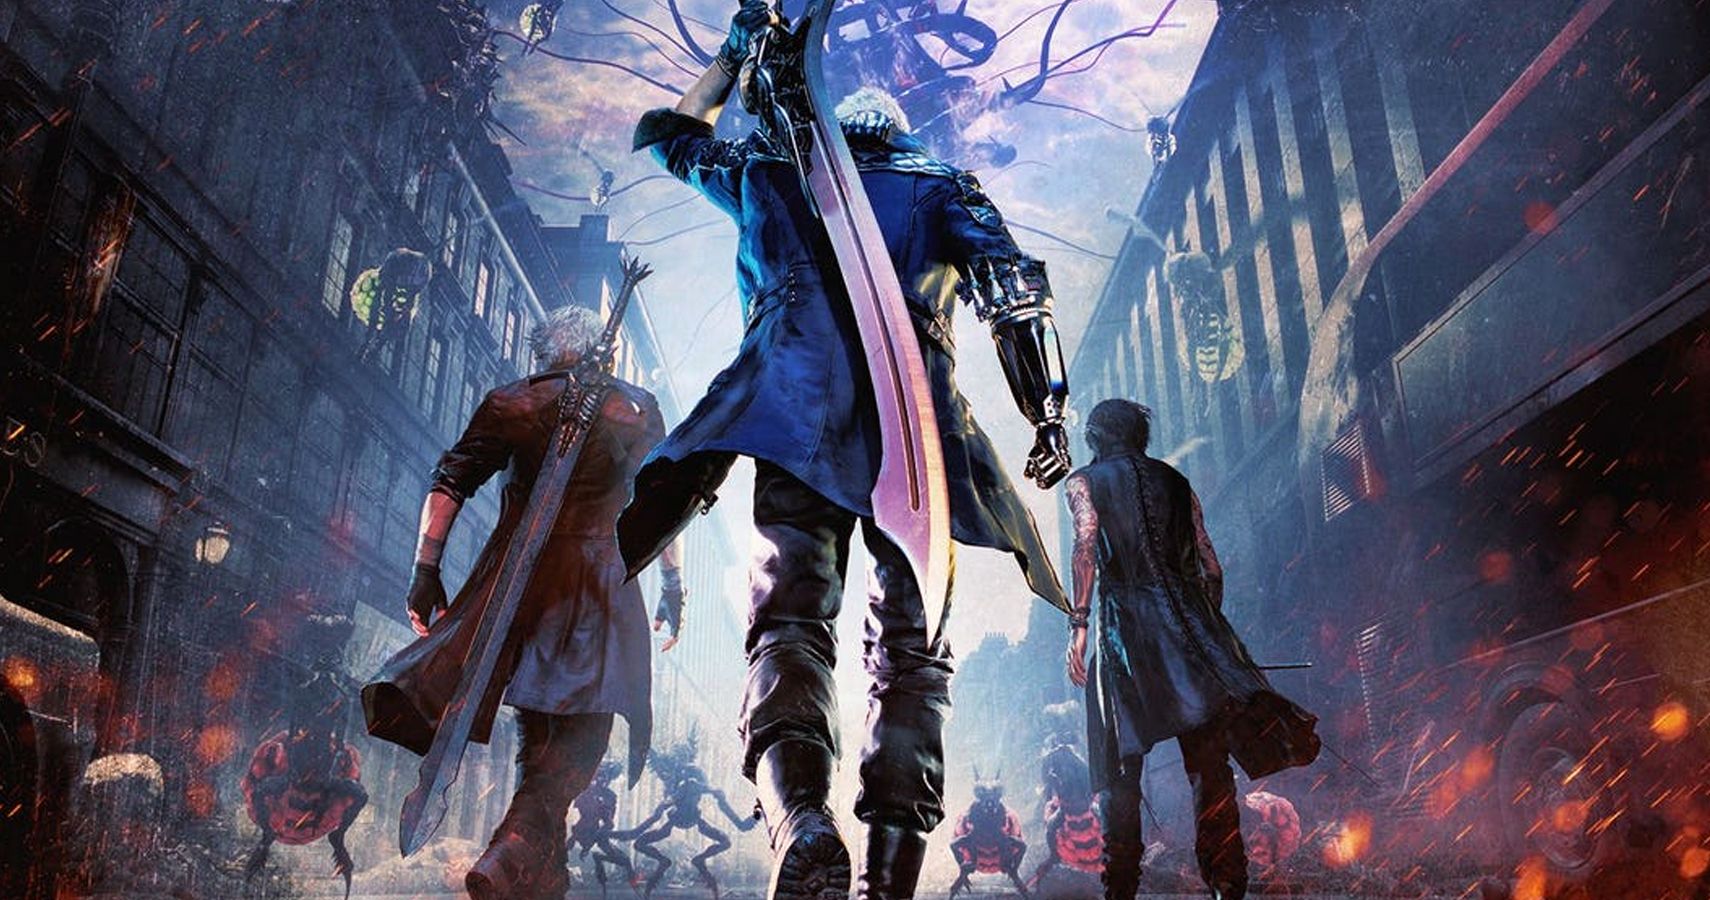 Devil May Cry 5 All Weapons Guide - Fextralife